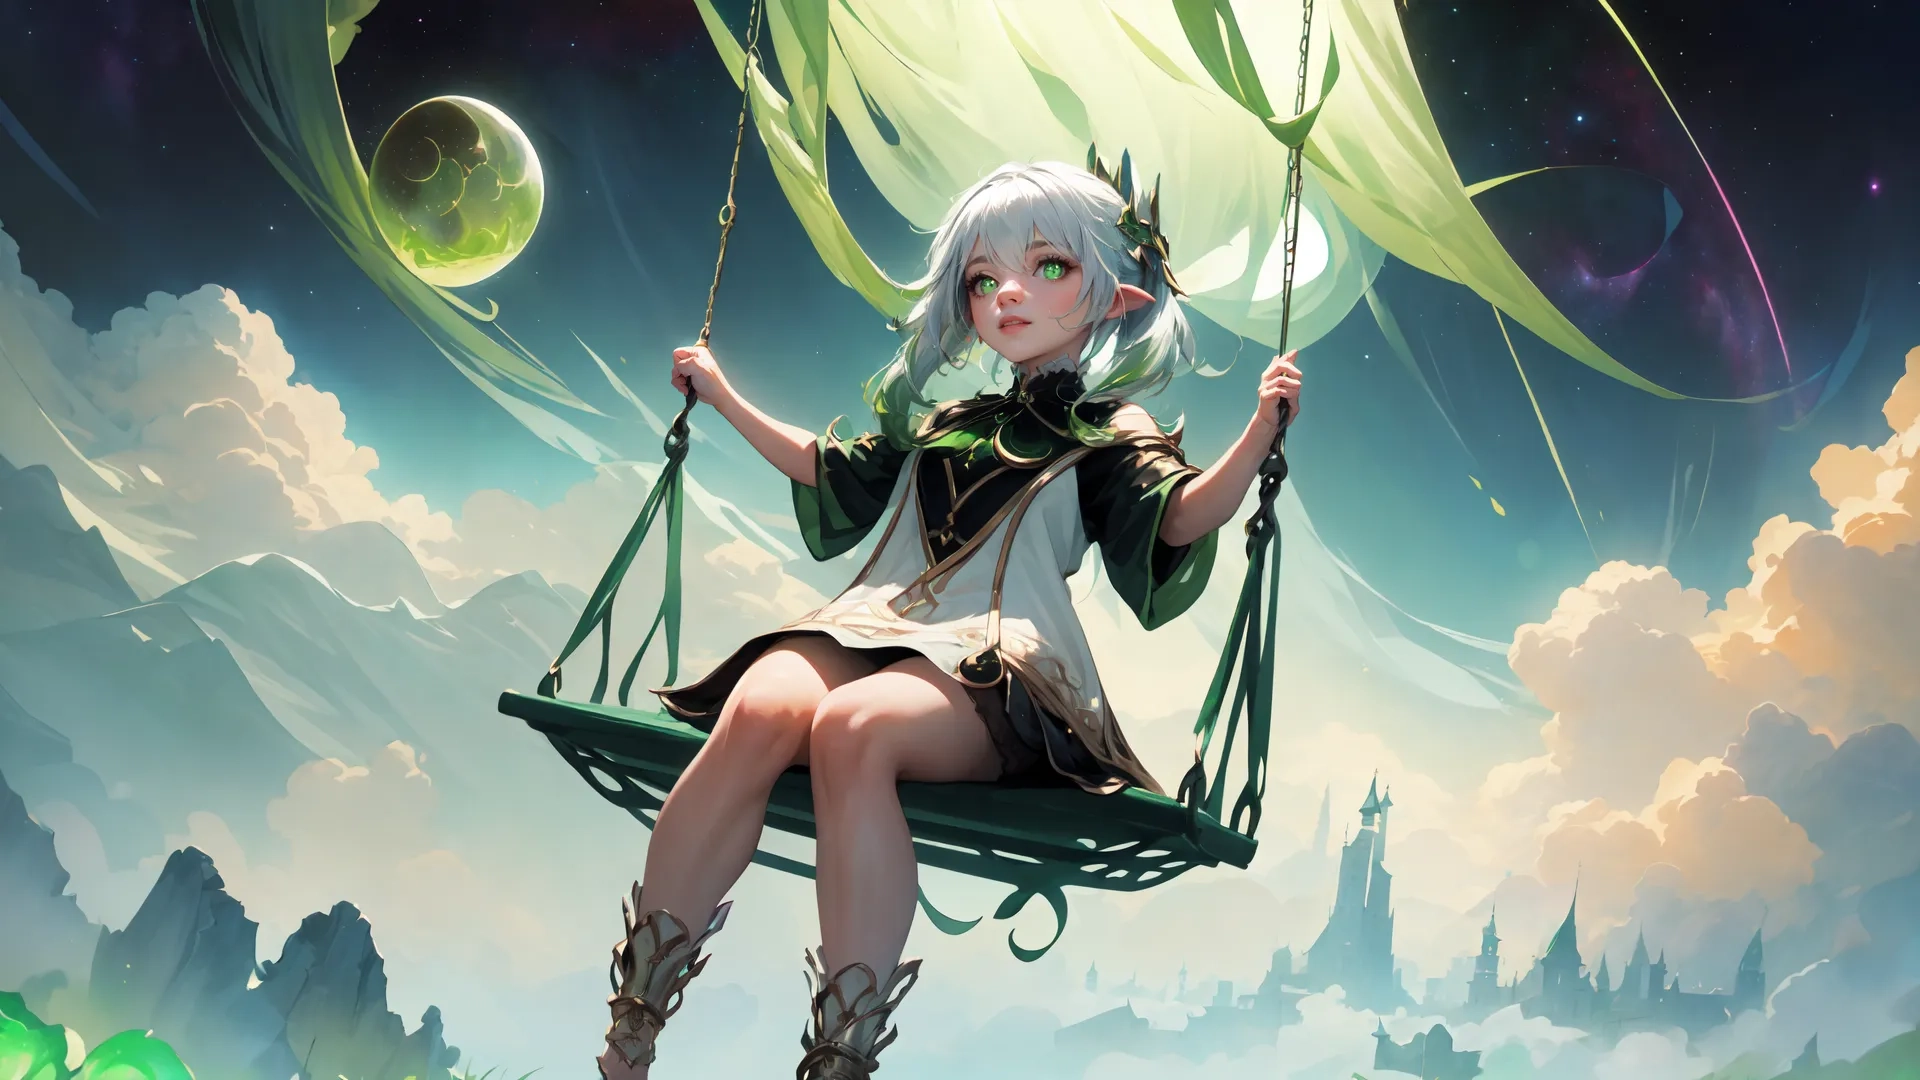 the girl is swinging on the swingside in the sky with some green and yellow stars in the background, and a few purple butterflies and blue balls floating
